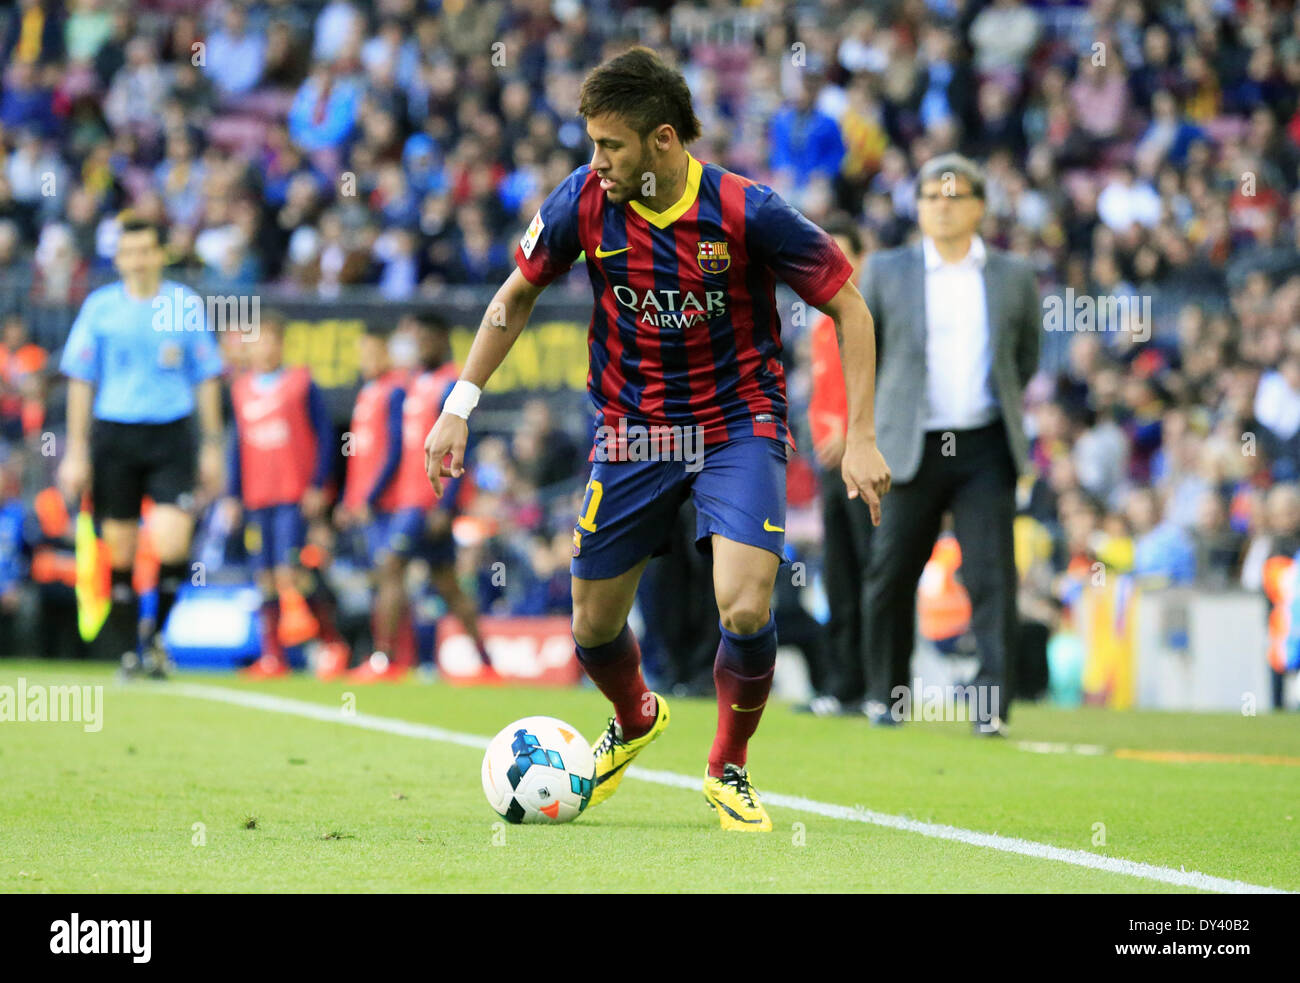 Barcelona, Spain. 5th Apr, 2014. Neymar Jr. in the match between FC Barcelona and Betis for the week 32 of the spanish league, played at the Camp Nou on 5 april, 2014. Photo: Joan Valls/Urbanandsport/Nurphoto. Credit:  Joan Valls/NurPhoto/ZUMAPRESS.com/Alamy Live News Stock Photo